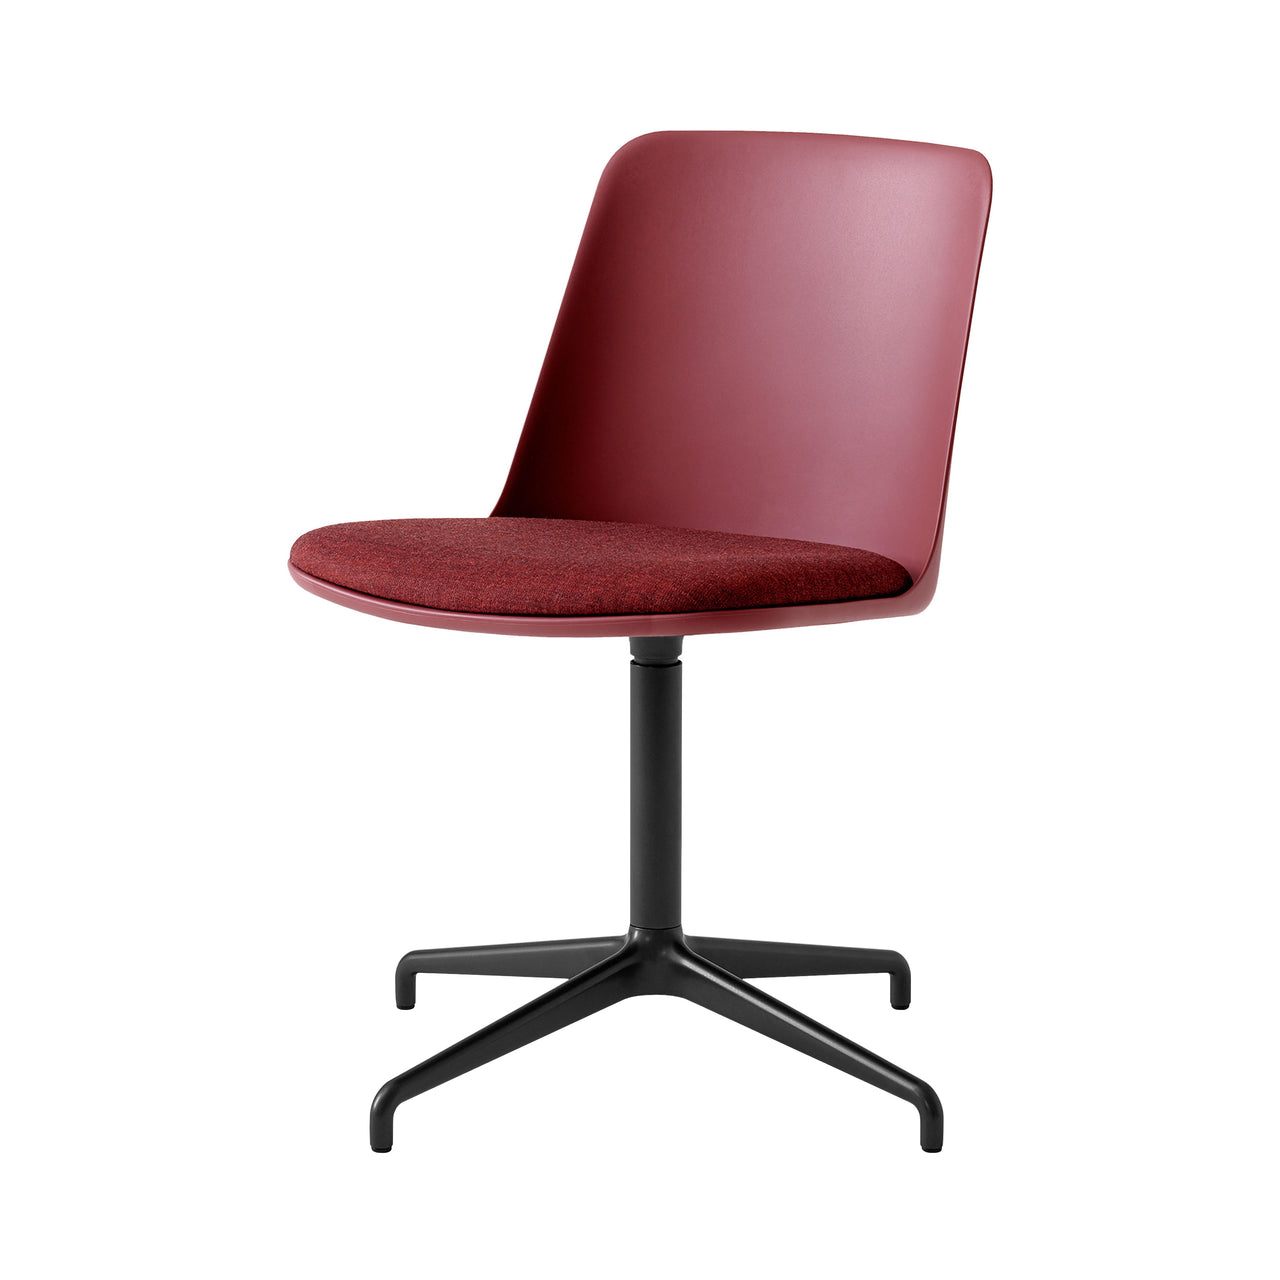 Rely Chair HW17: Red Brown + Black